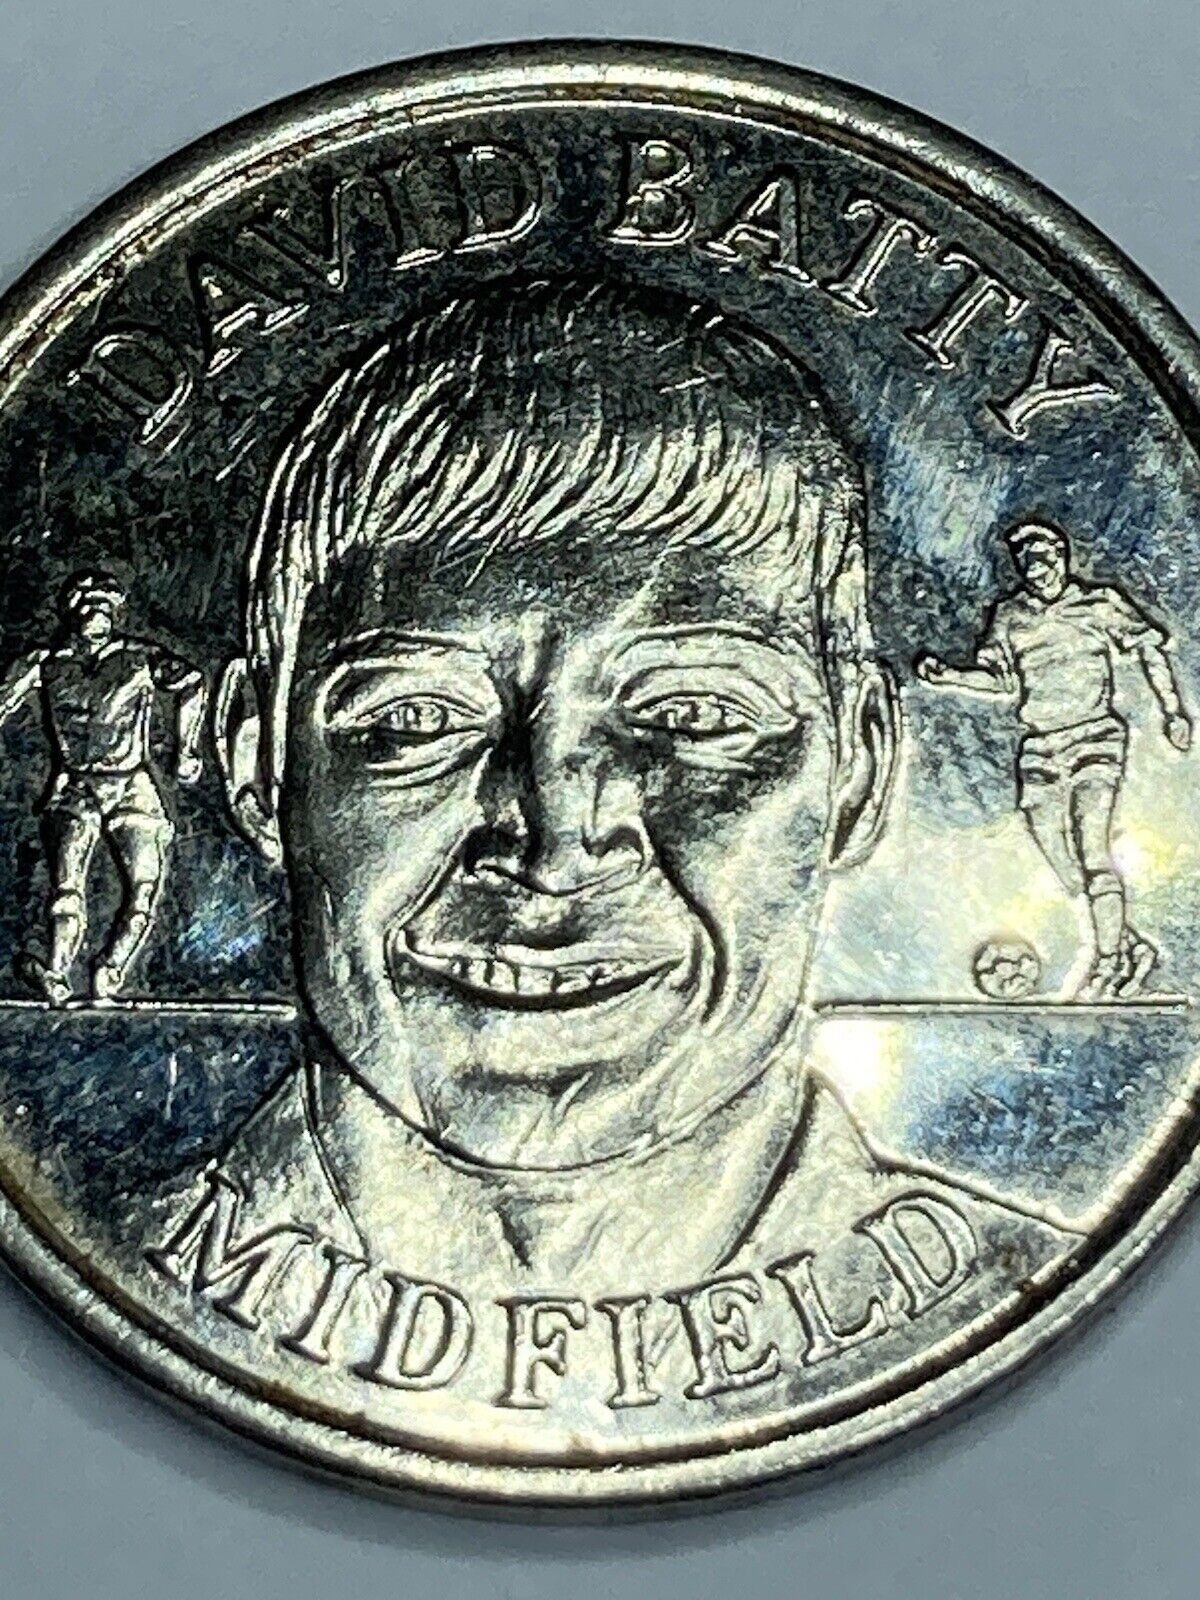 The official England squad 1998 medal collection coin - Midfield David Batty bk1